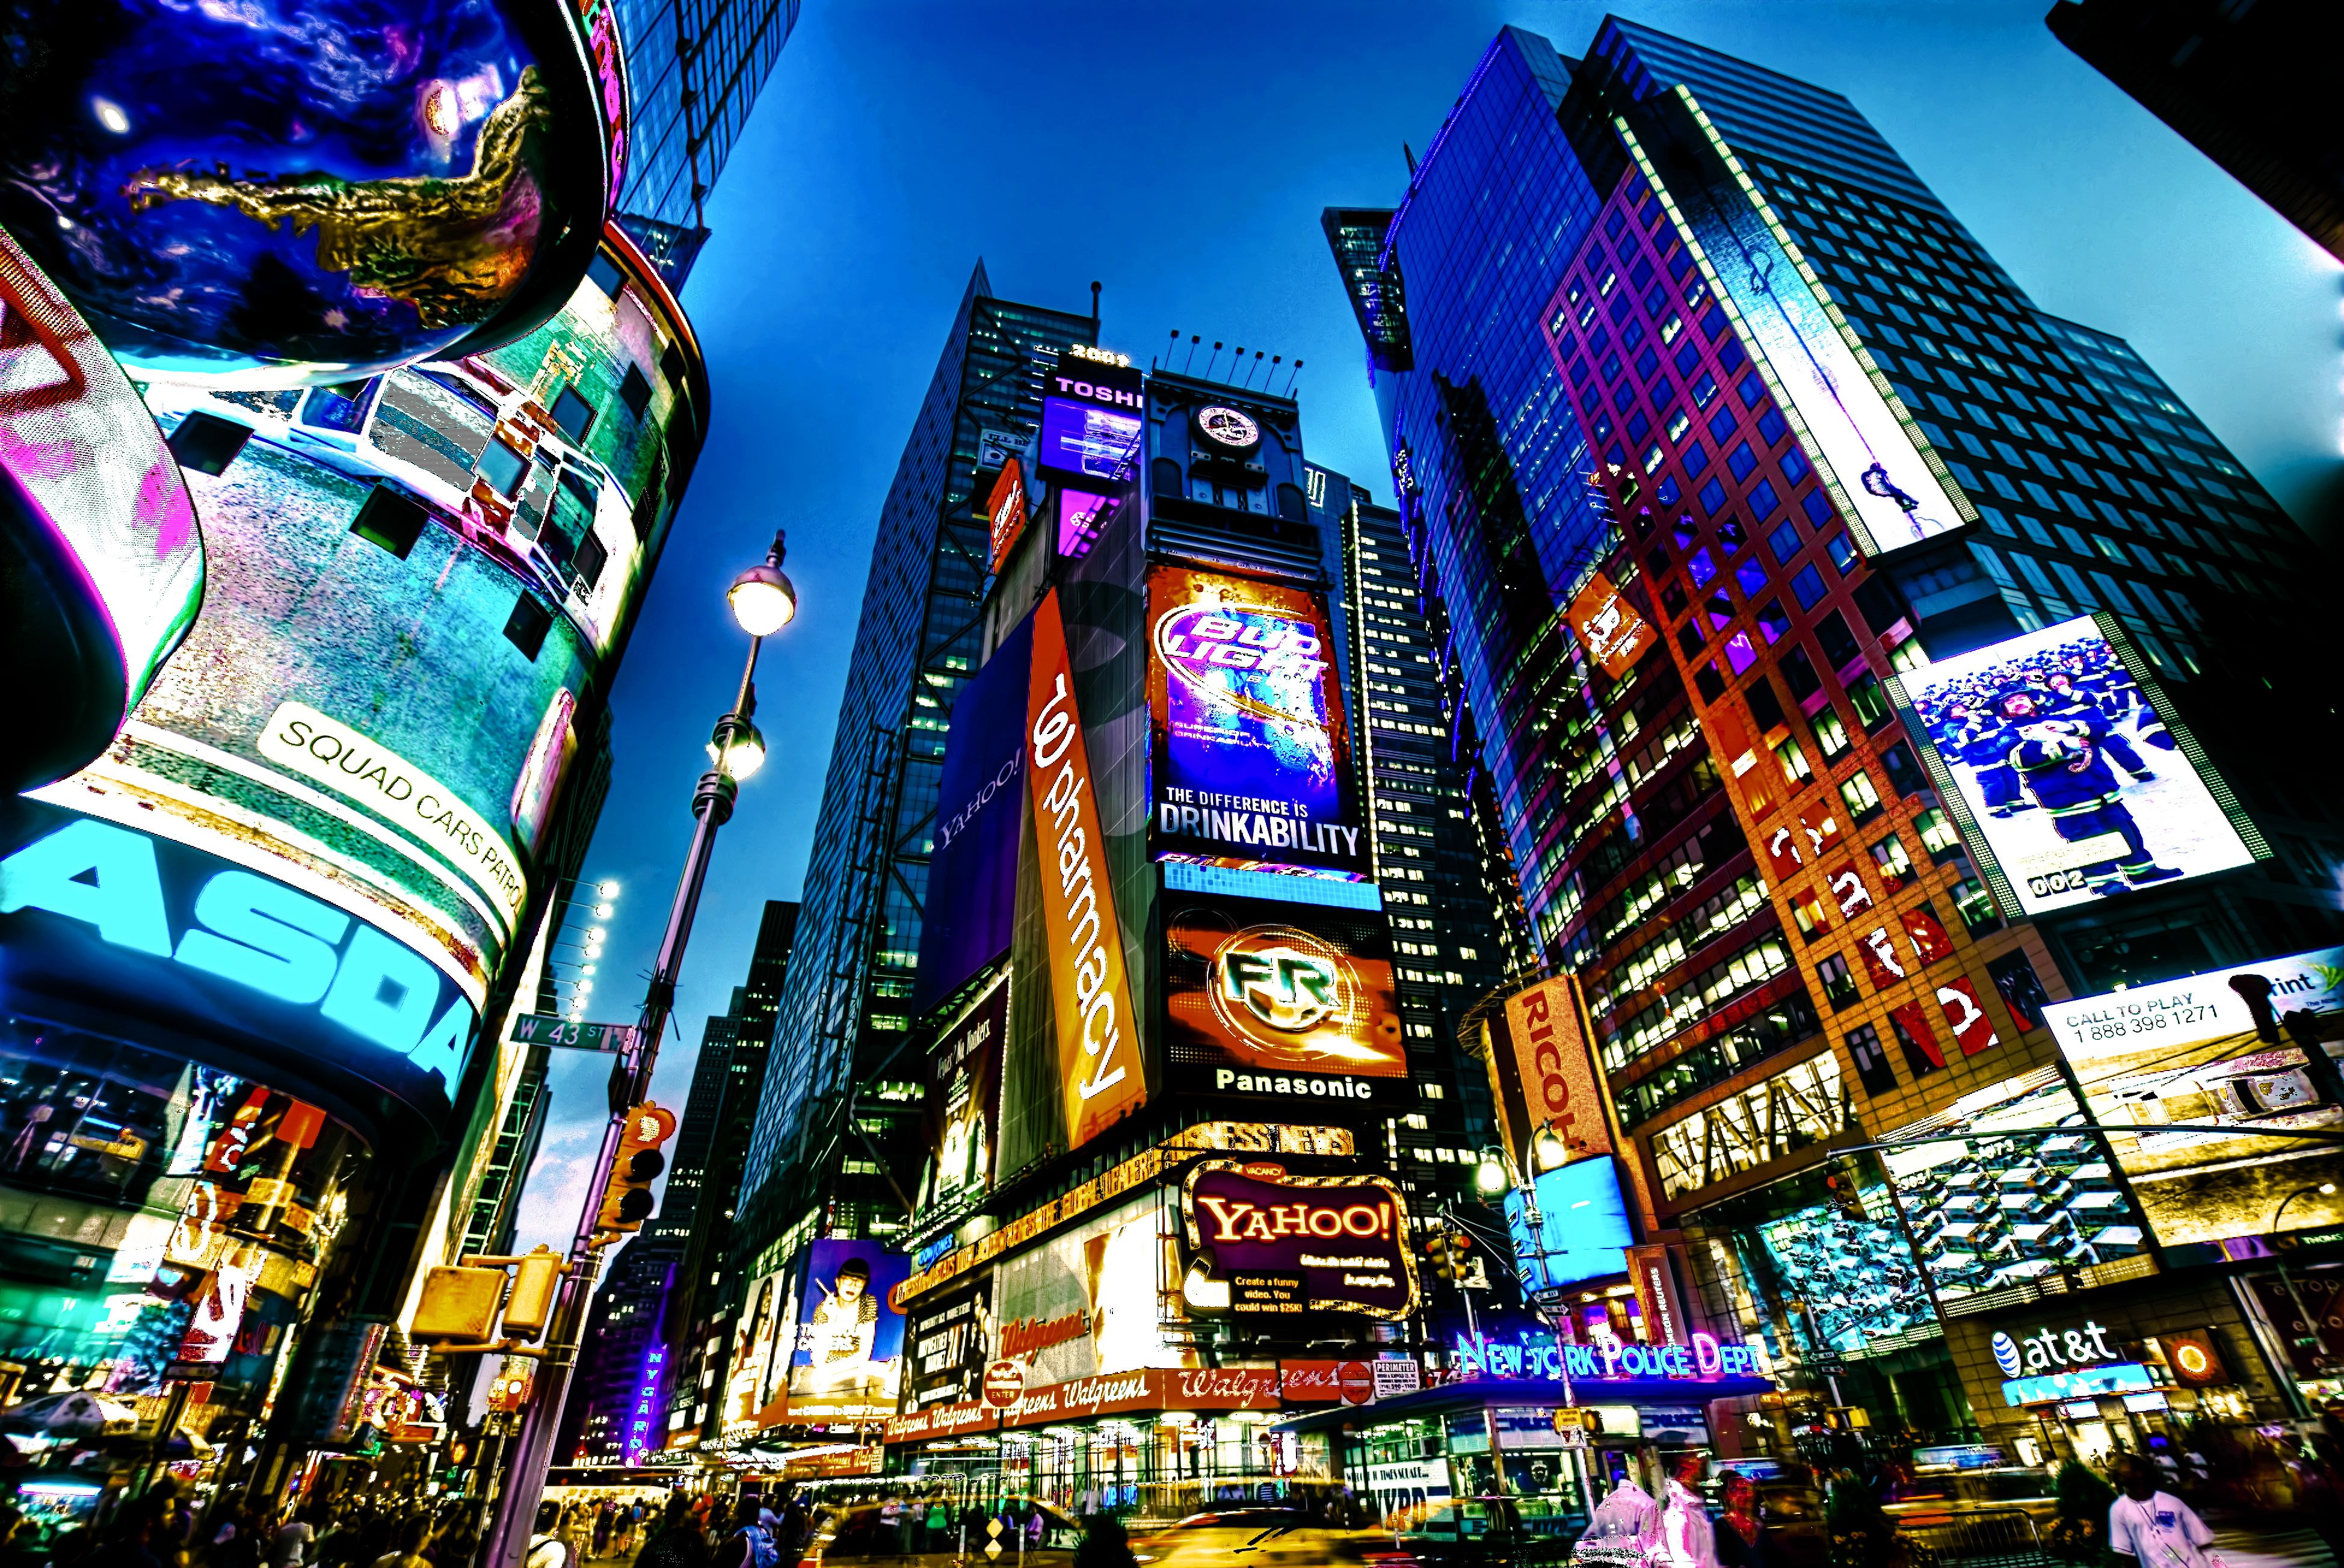 Times Square Wallpaper iPhone - wallpaper.